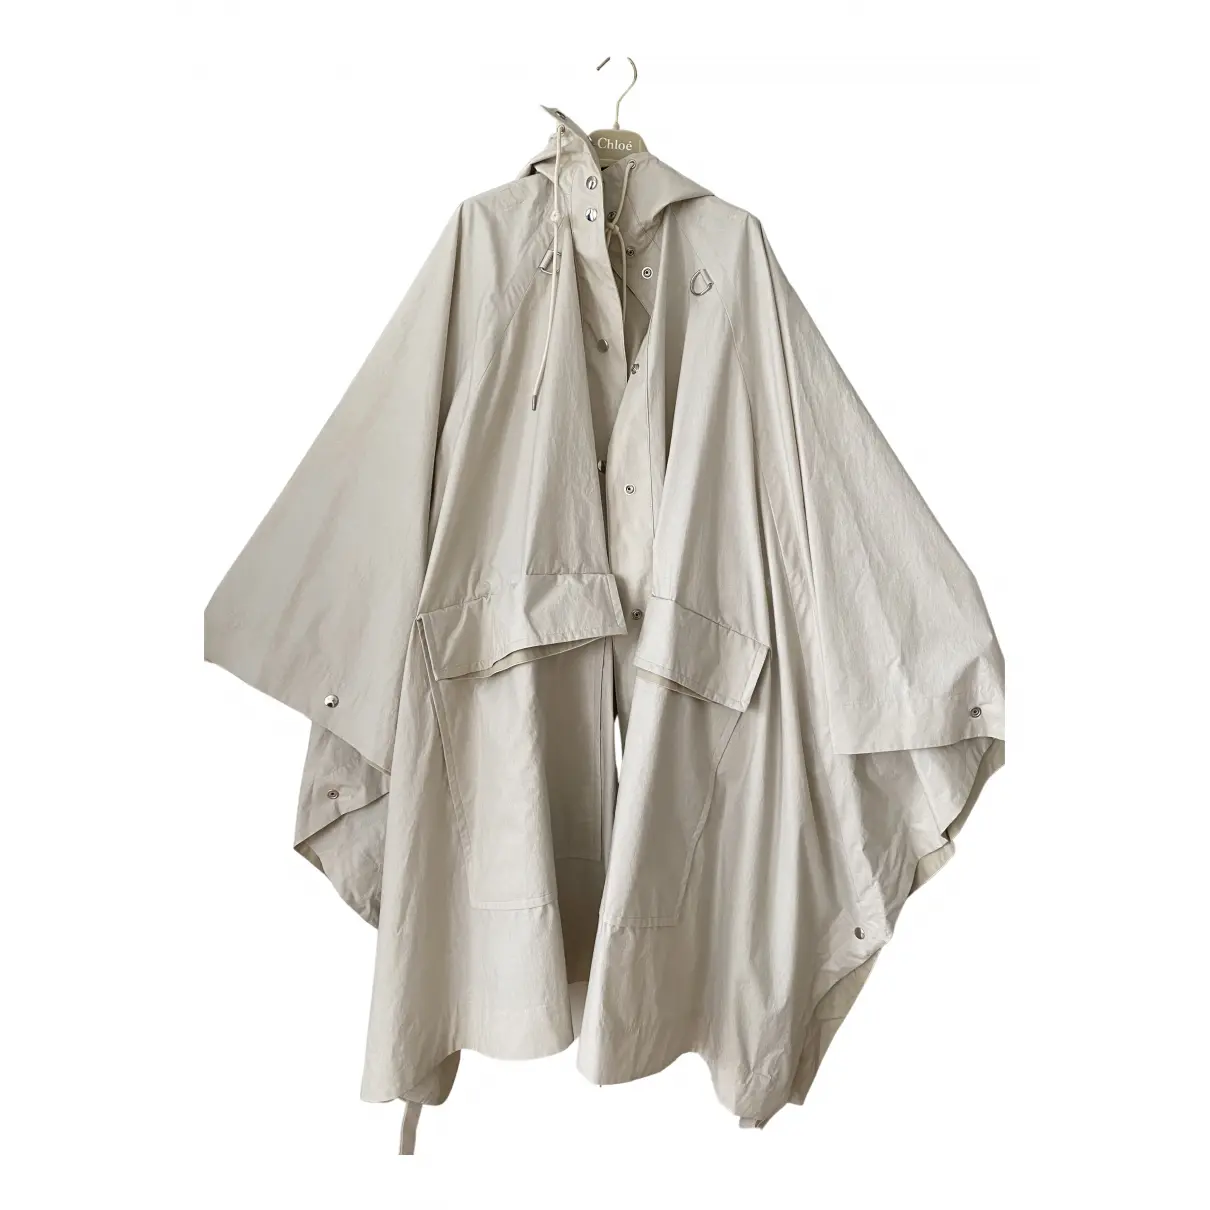 Trench coat Lemaire